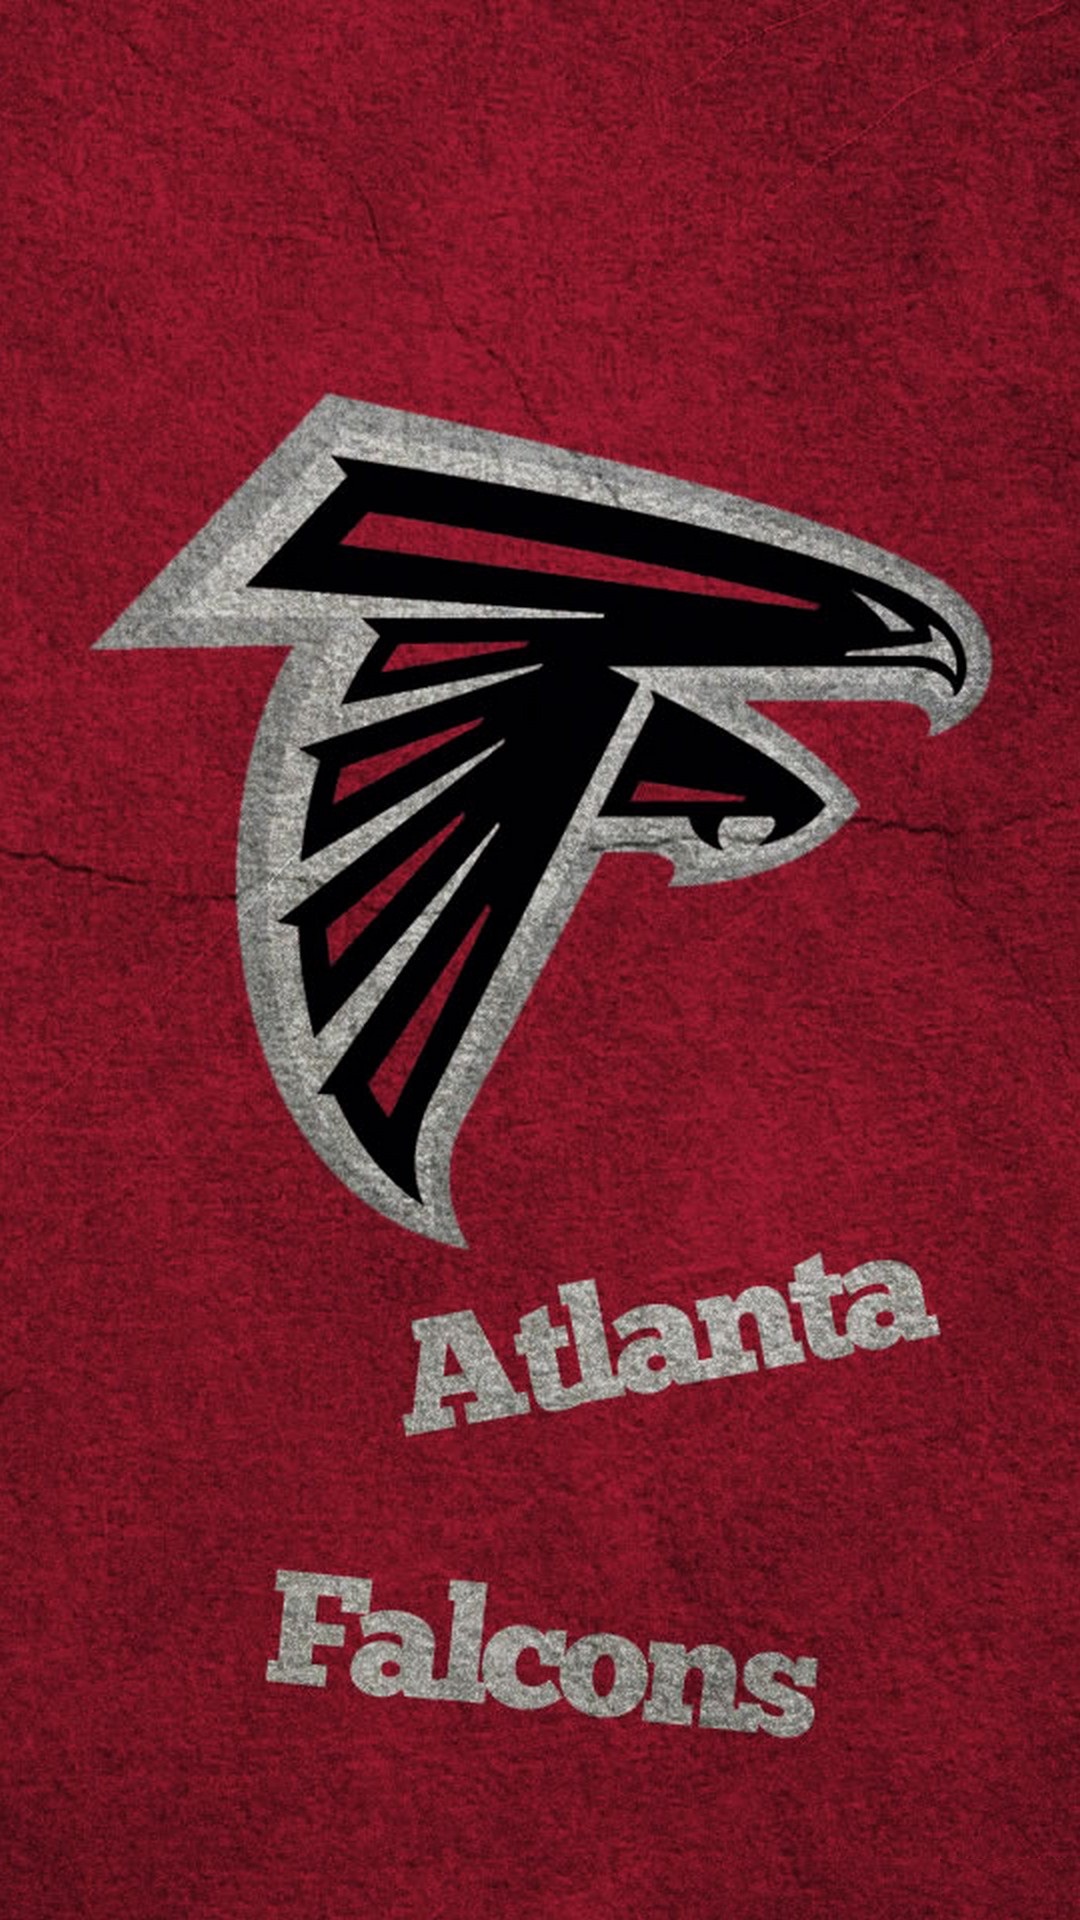 Atlanta Falcons iPhone XR Wallpaper With high-resolution 1080X1920 pixel. Download and set as wallpaper for Apple iPhone X, XS Max, XR, 8, 7, 6, SE, iPad, Android